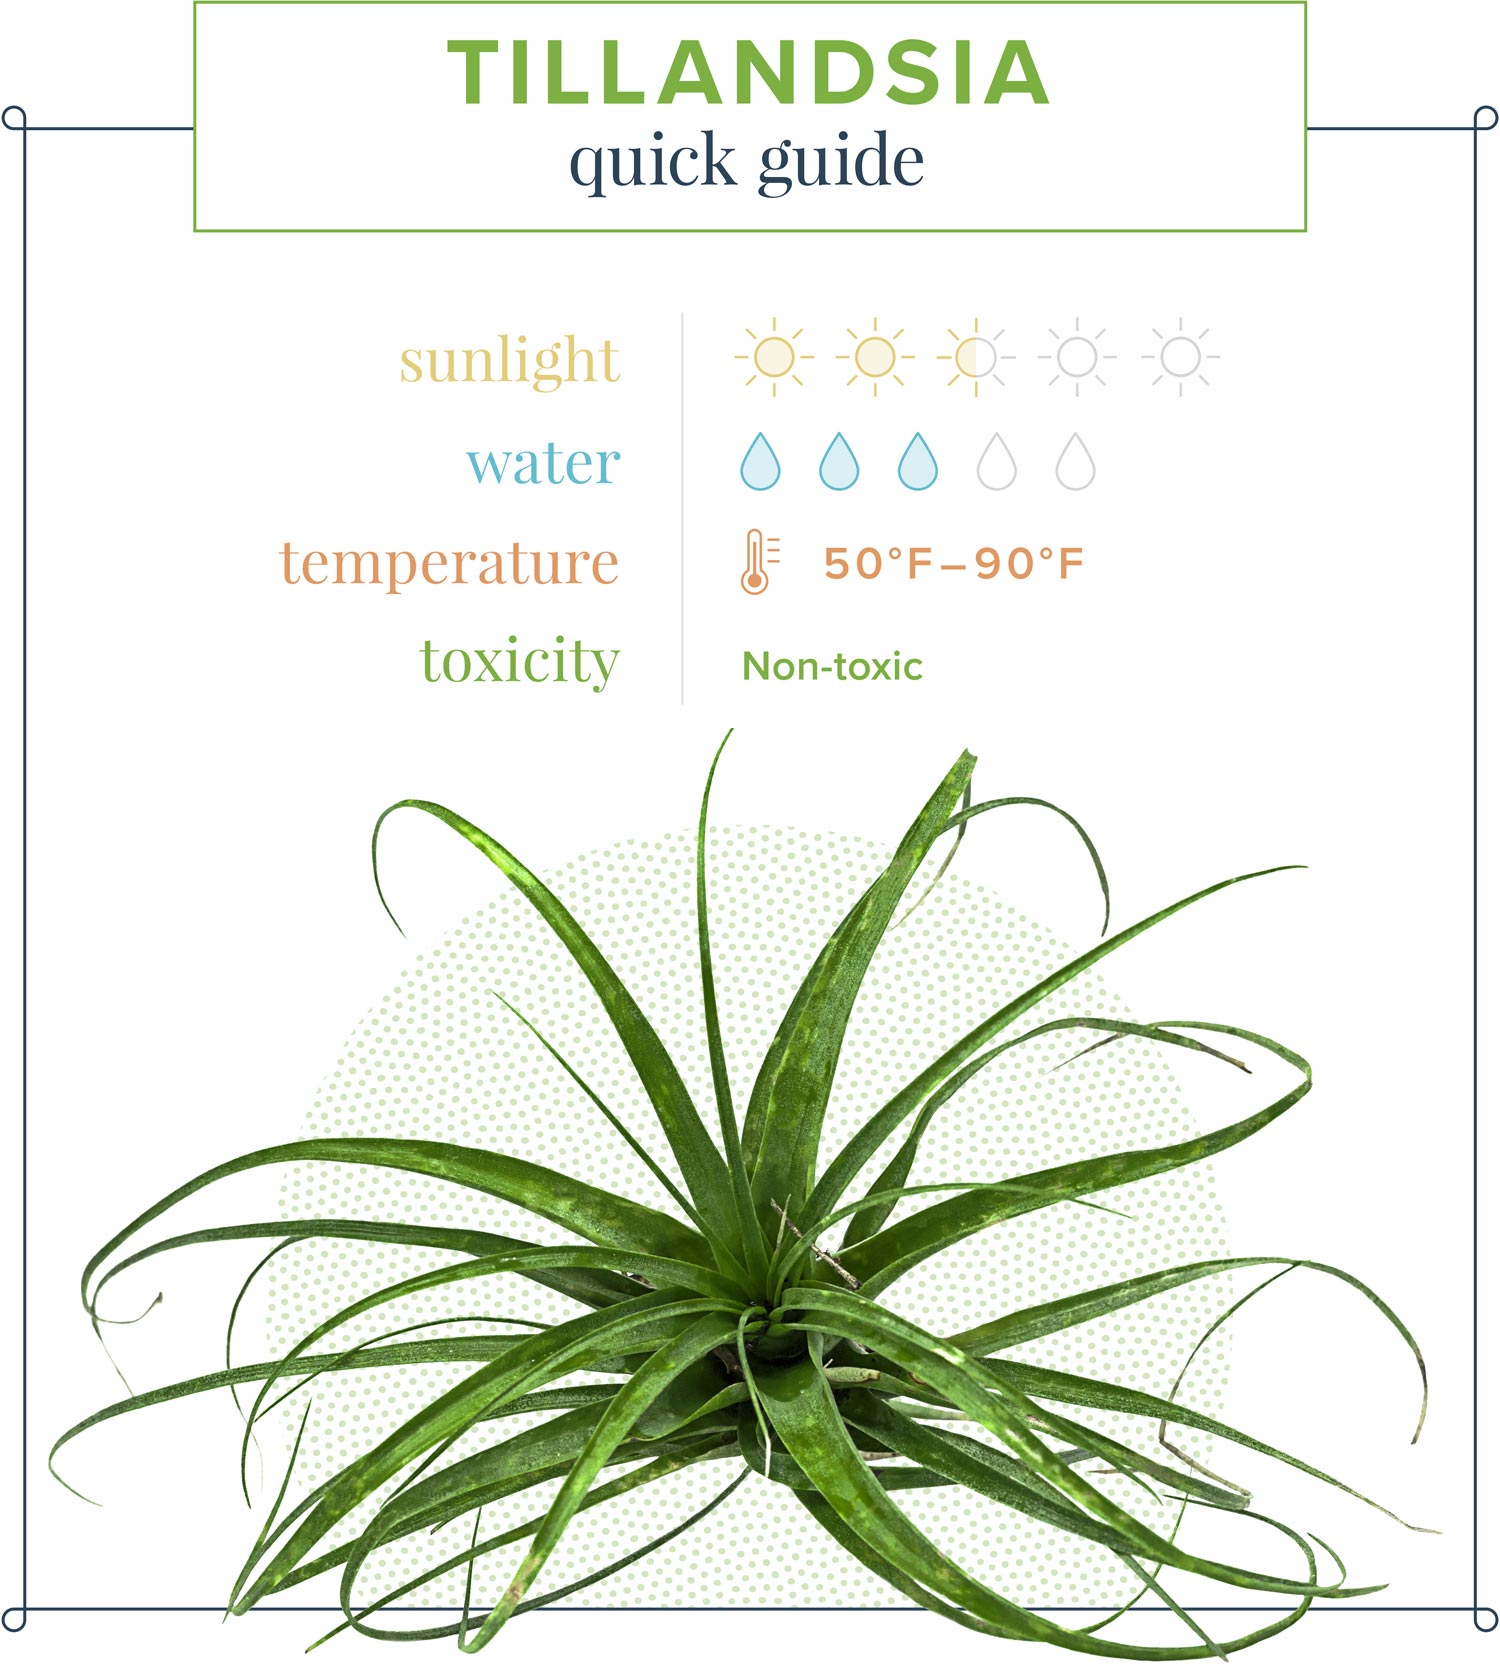 How to water an air plant by misting